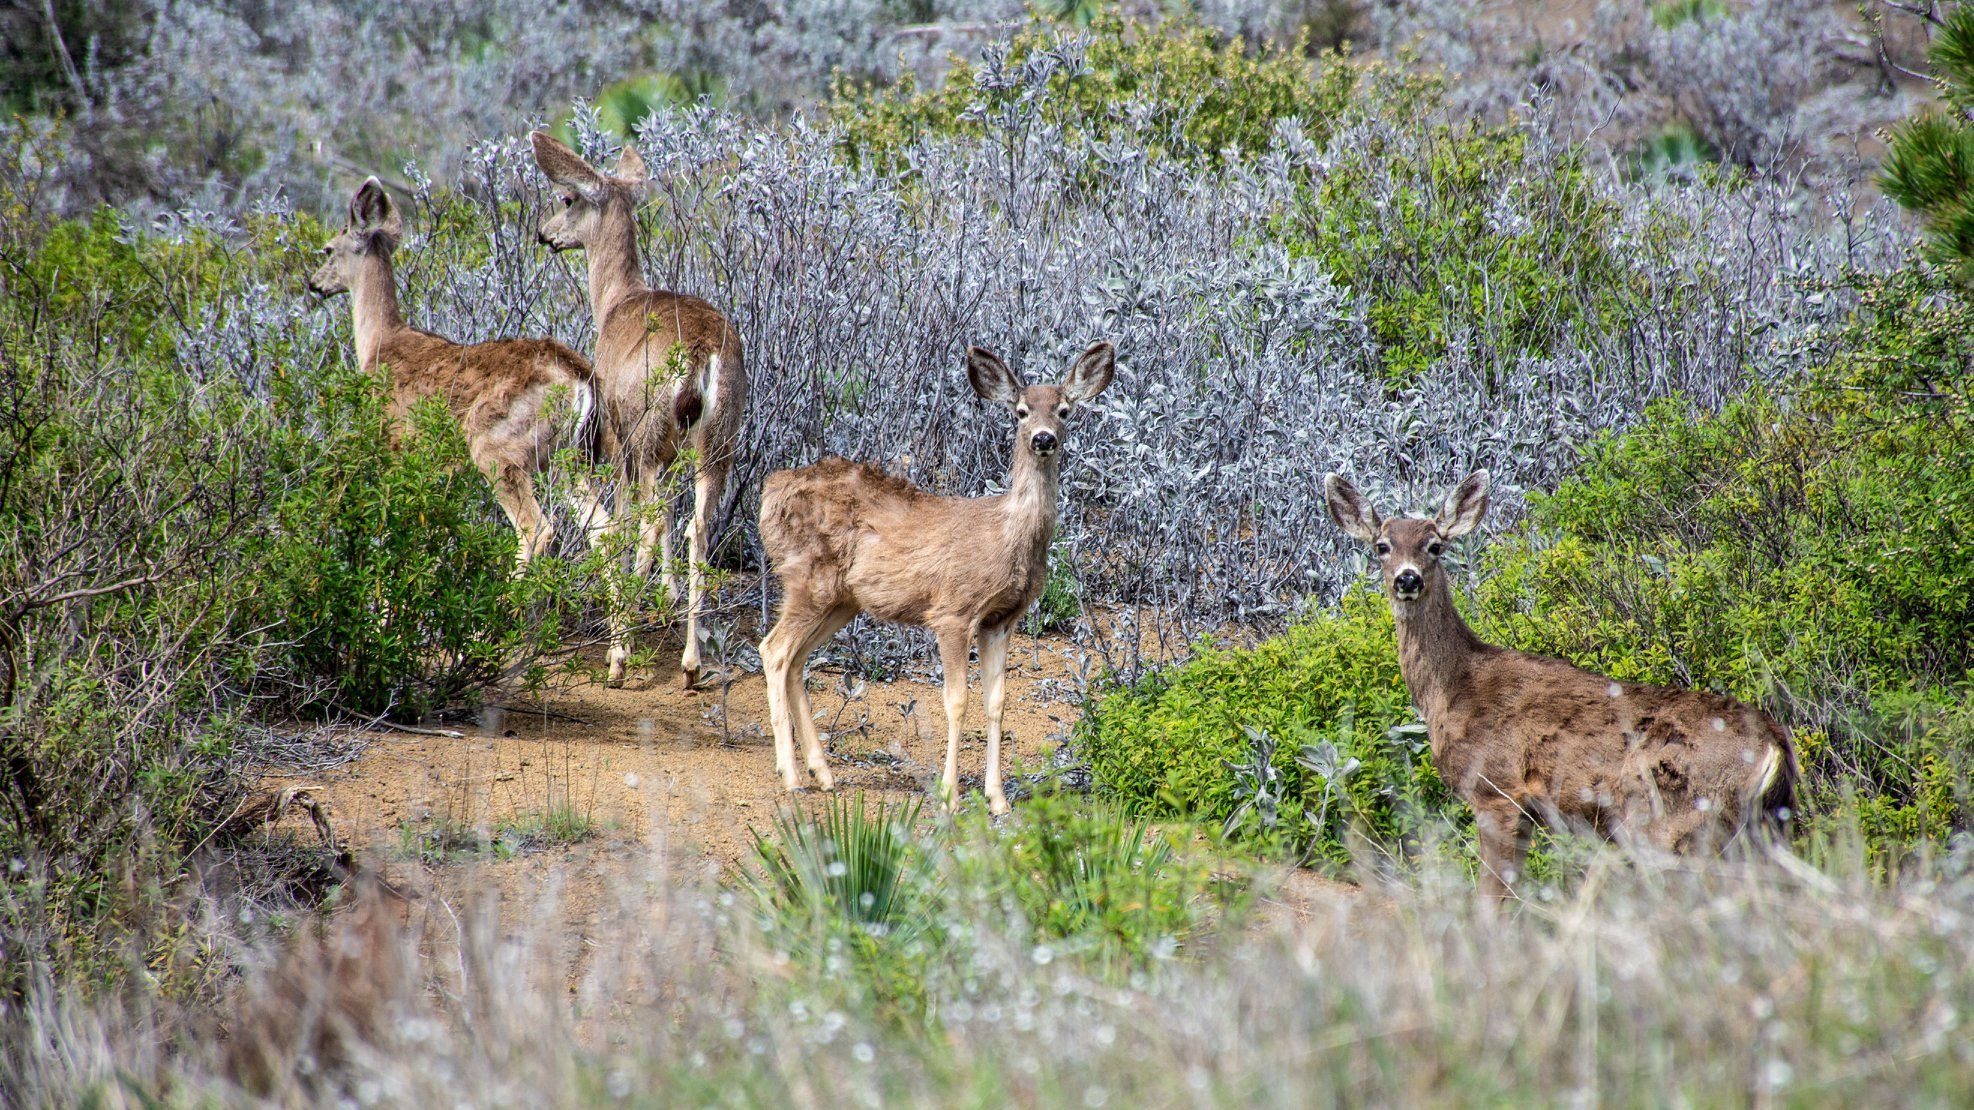 4 deer in a meadow in the Los Padres National Forest.